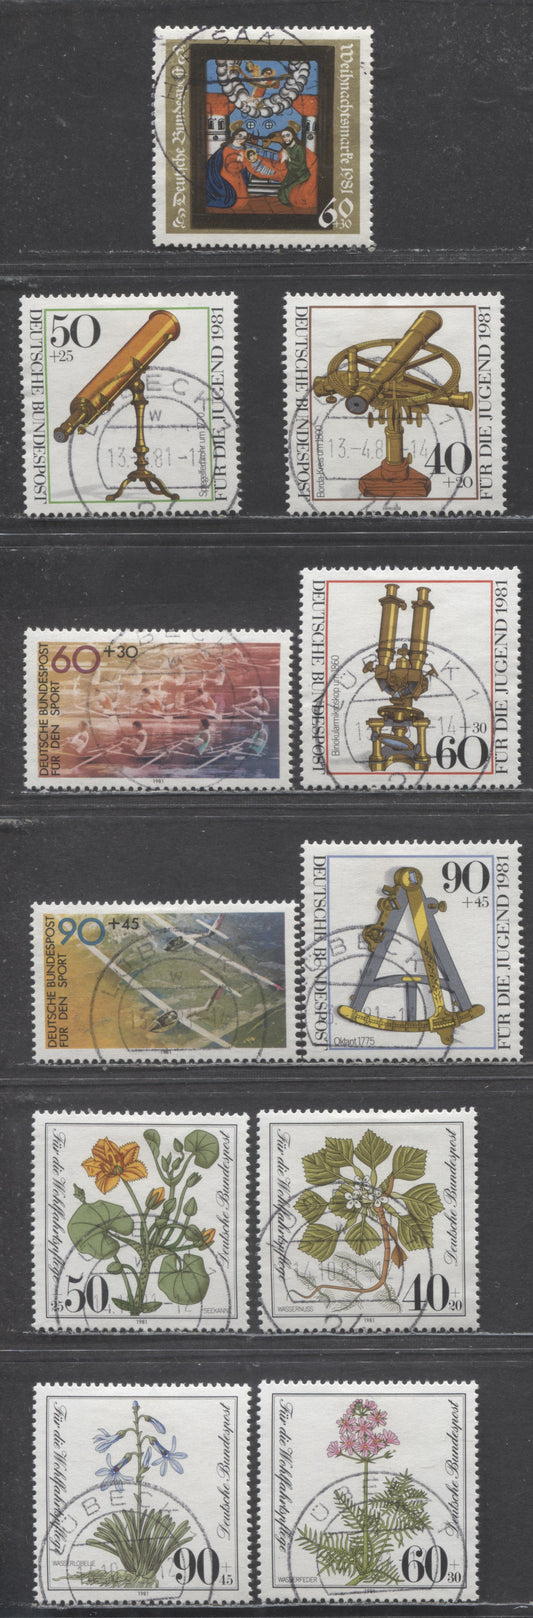 Lot 97 Germany SC#B583-B593(Mi#1090/1113) 1981 Semi Postals Issue, 11 Very Fine Used Singles, Click on Listing to See ALL Pictures, Estimated Value $10 USD